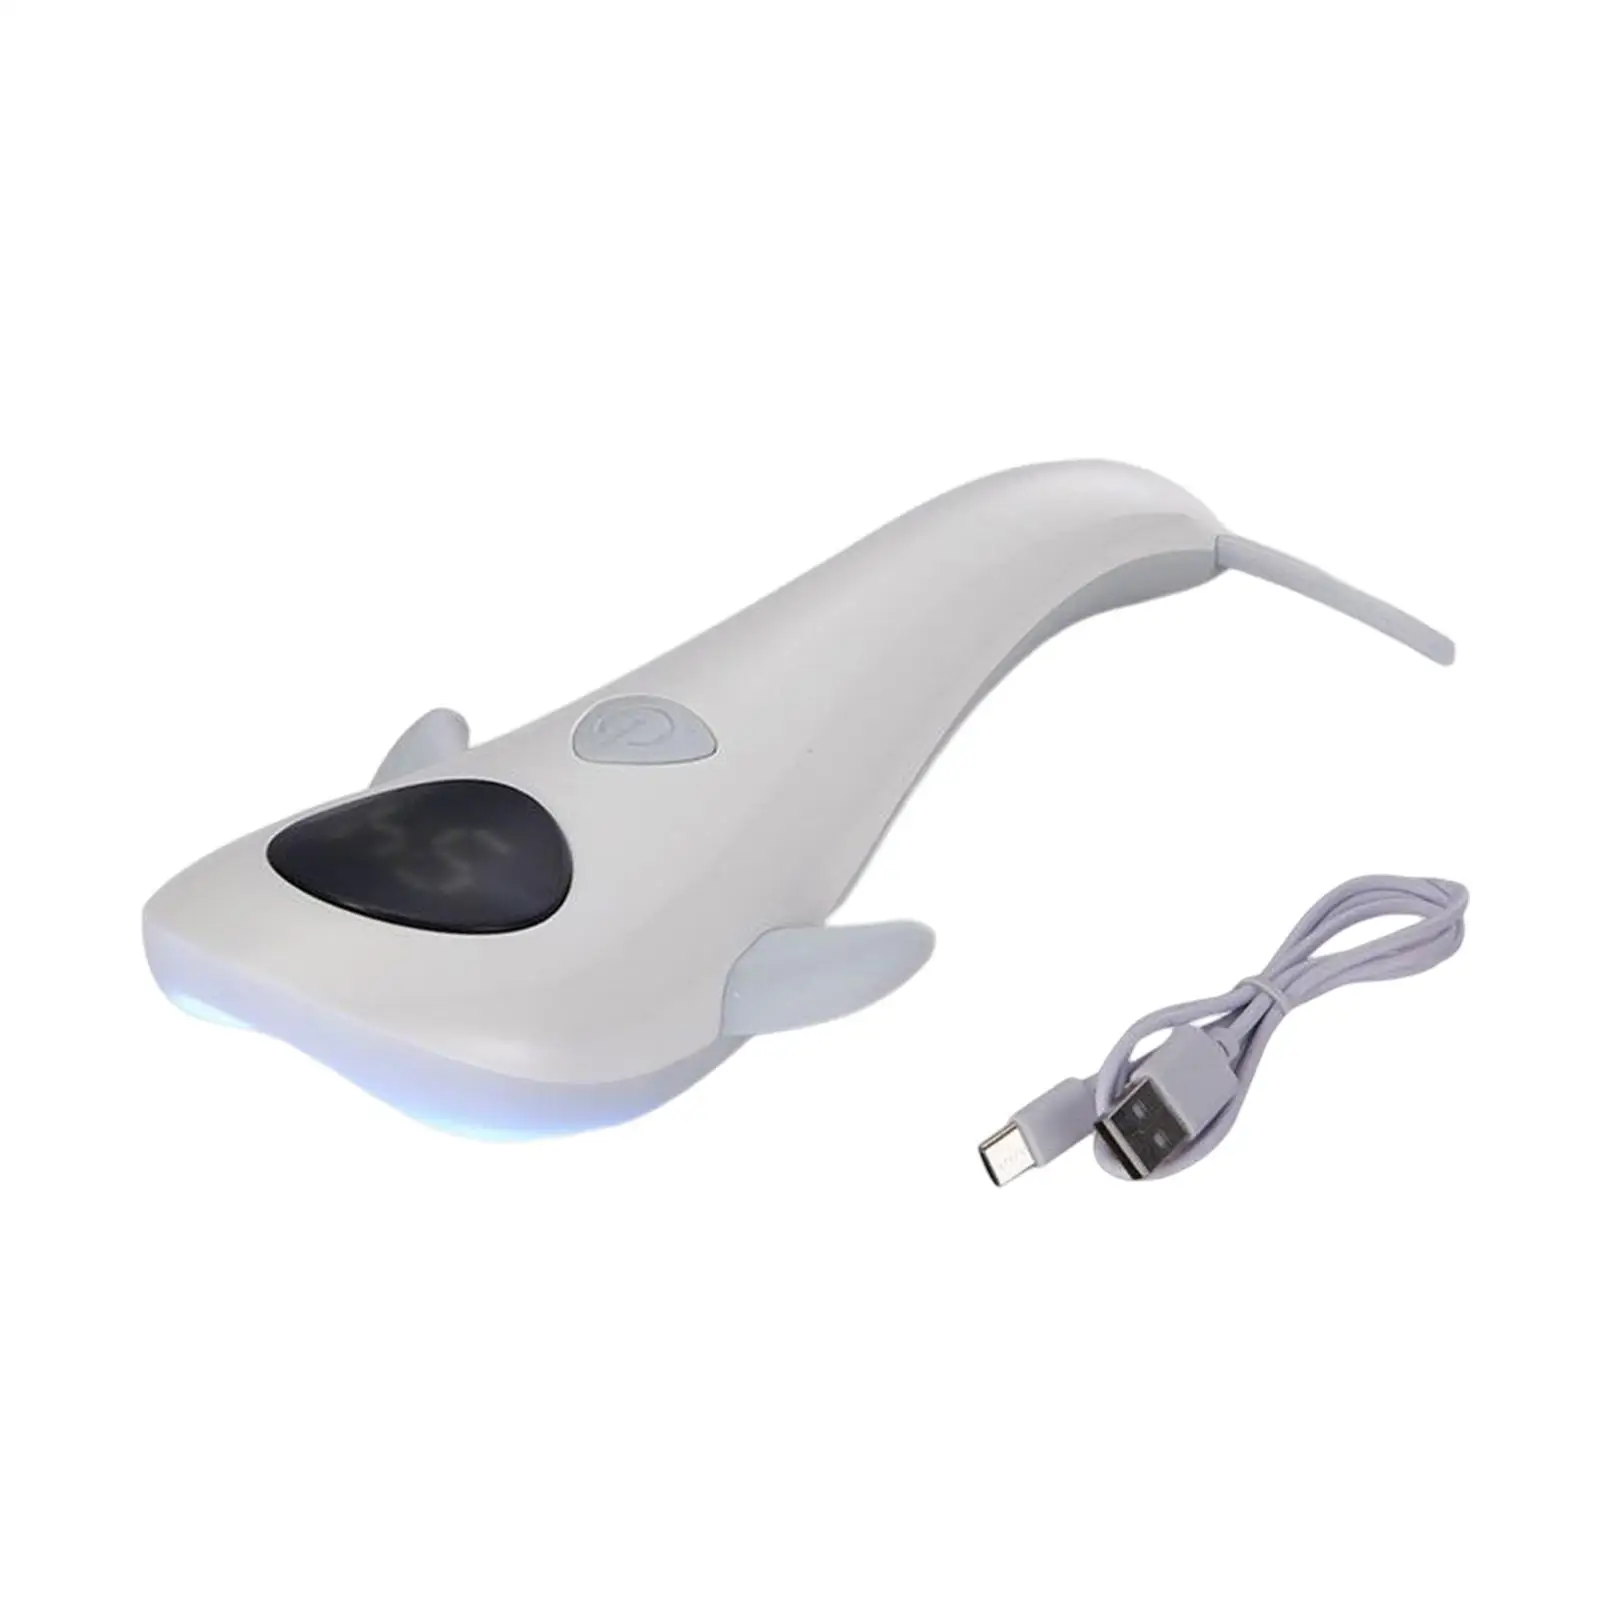 Professional Nail Lamp Salon and Home Use with 60S 90S 2 timers Digital Display Manicure Use C Quick Drying Handheld Nail Dryer